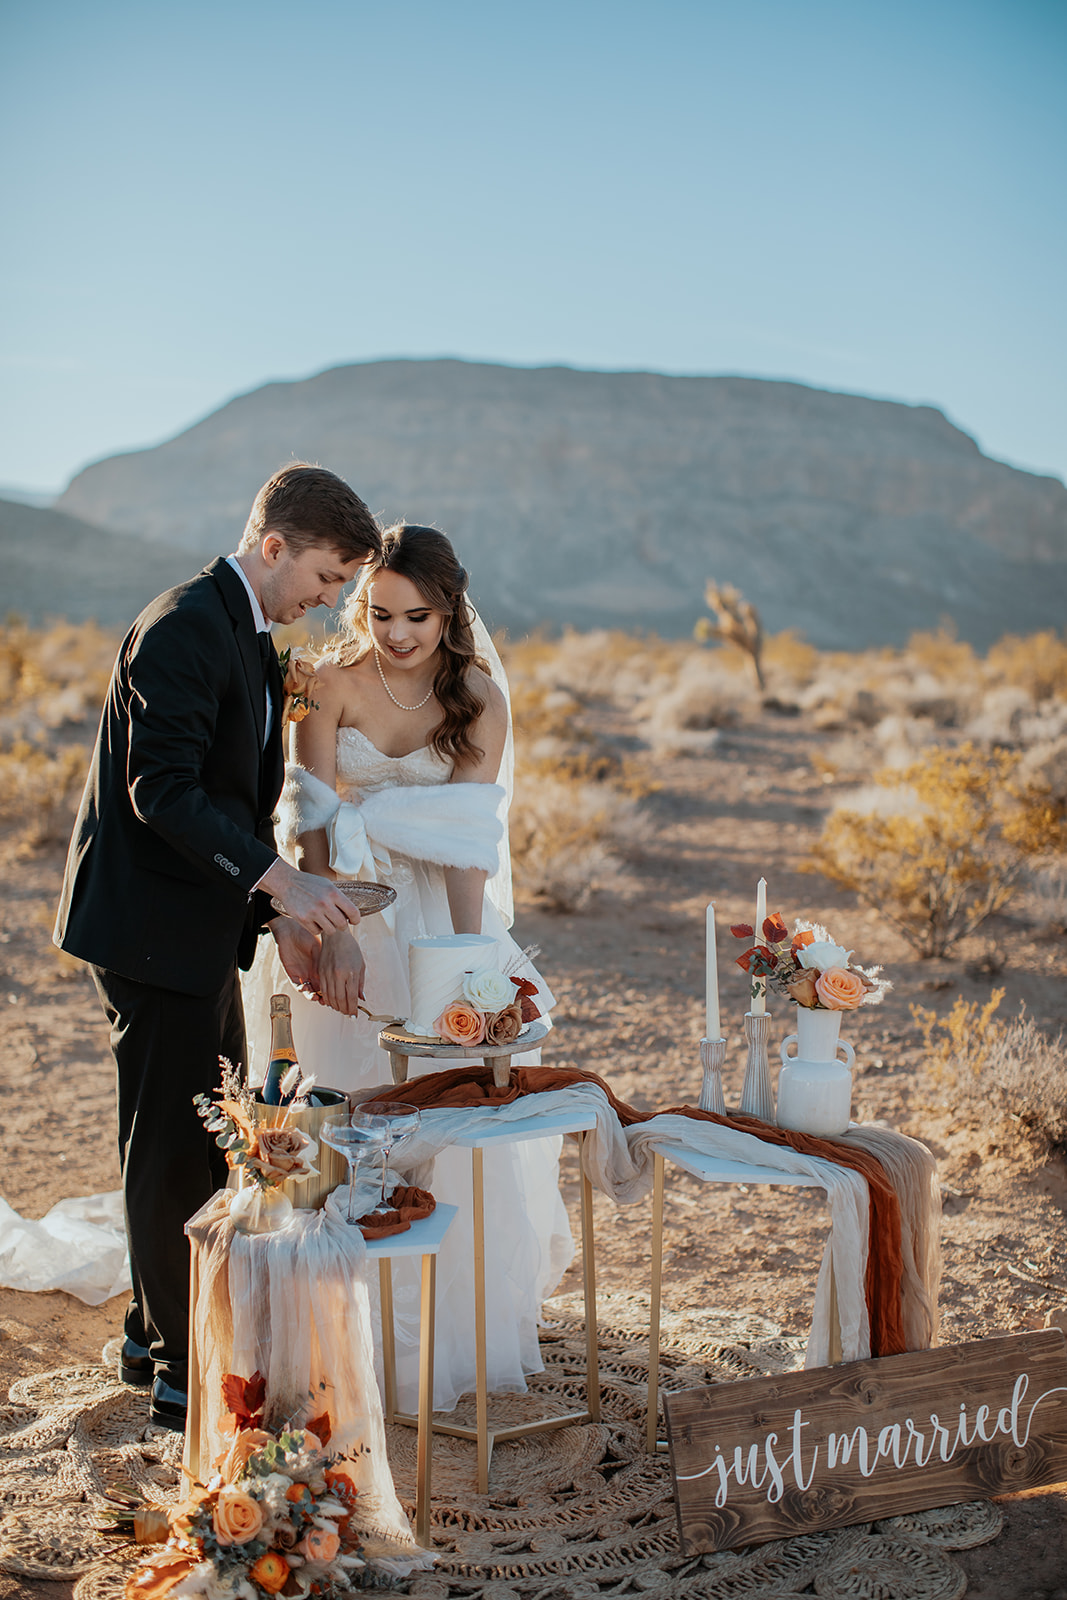 Bride and groom cutting a slice of their wedding cake in the desert in Las Vegas